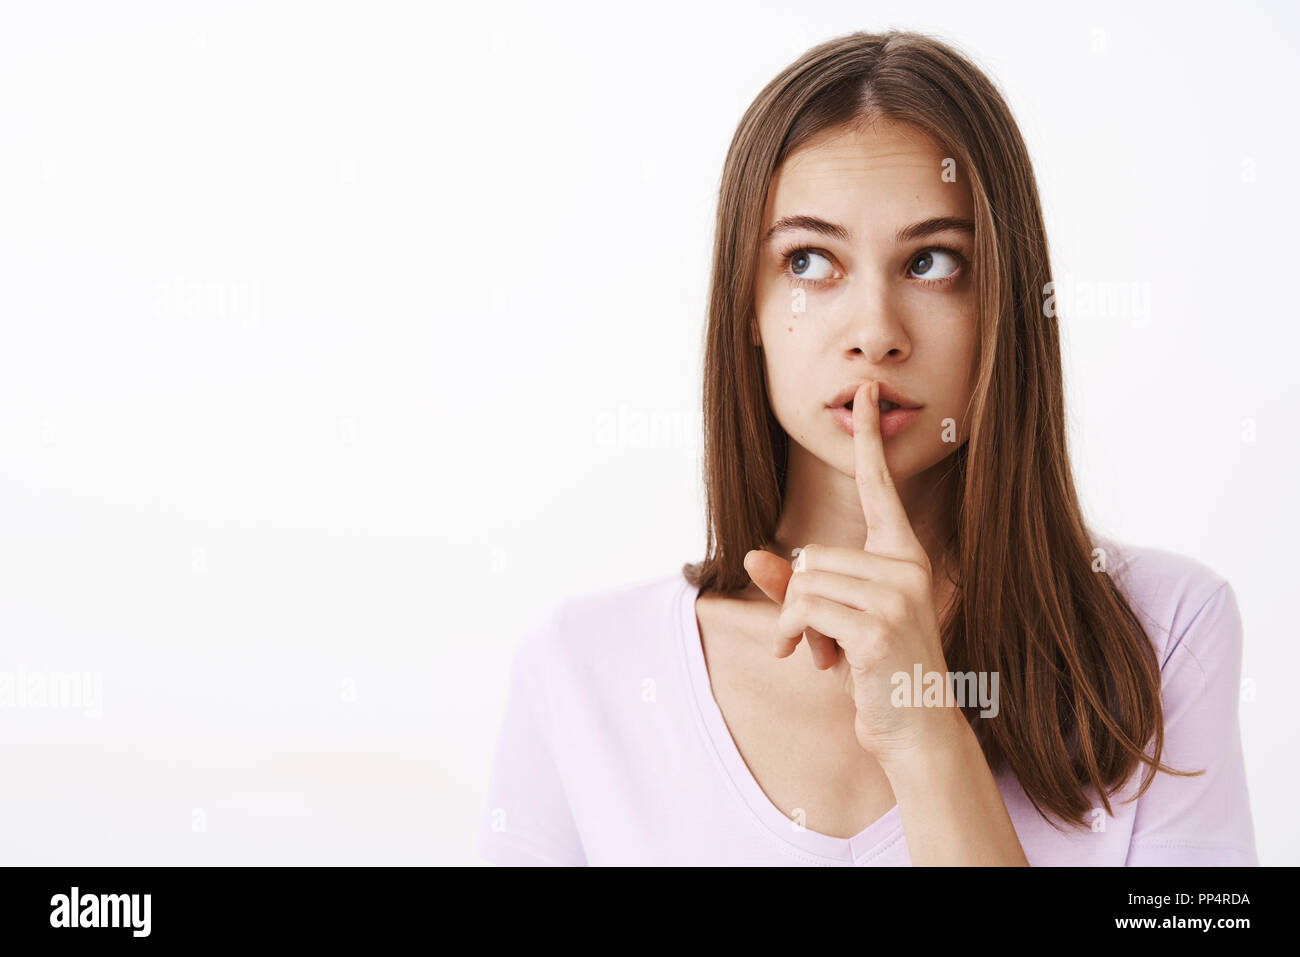 Girlfriend telling secret to friend feeling worried boyfriend find out showing shush gesture while saying shh with index finger over mouth looking at upper left corner worried and intense Stock Photo